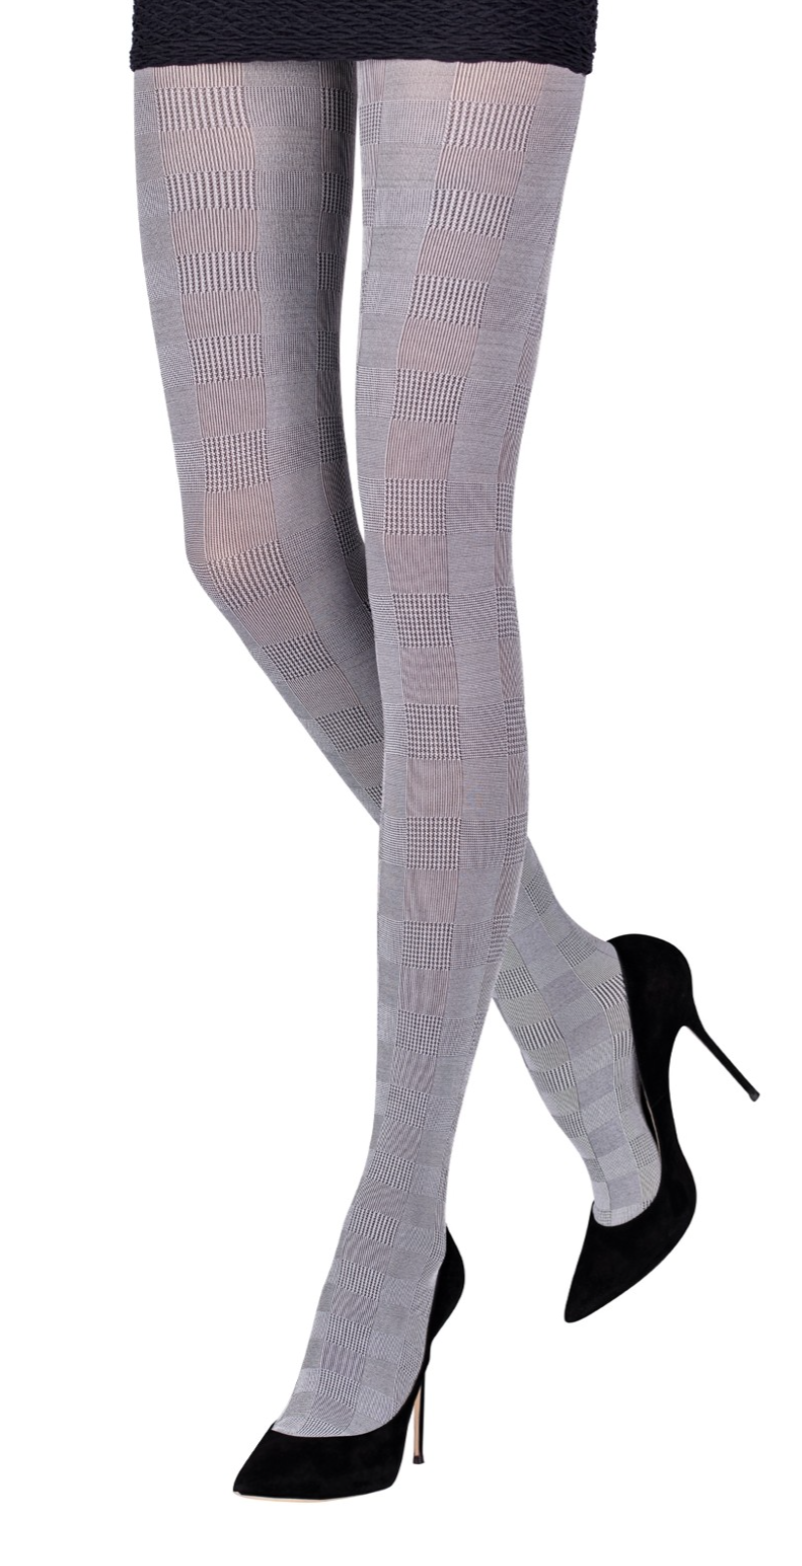 Emilio Cavallini Glen Plaid Tights - Opaque fashion tights with a woven plaid check style pattern in black and white (light grey).